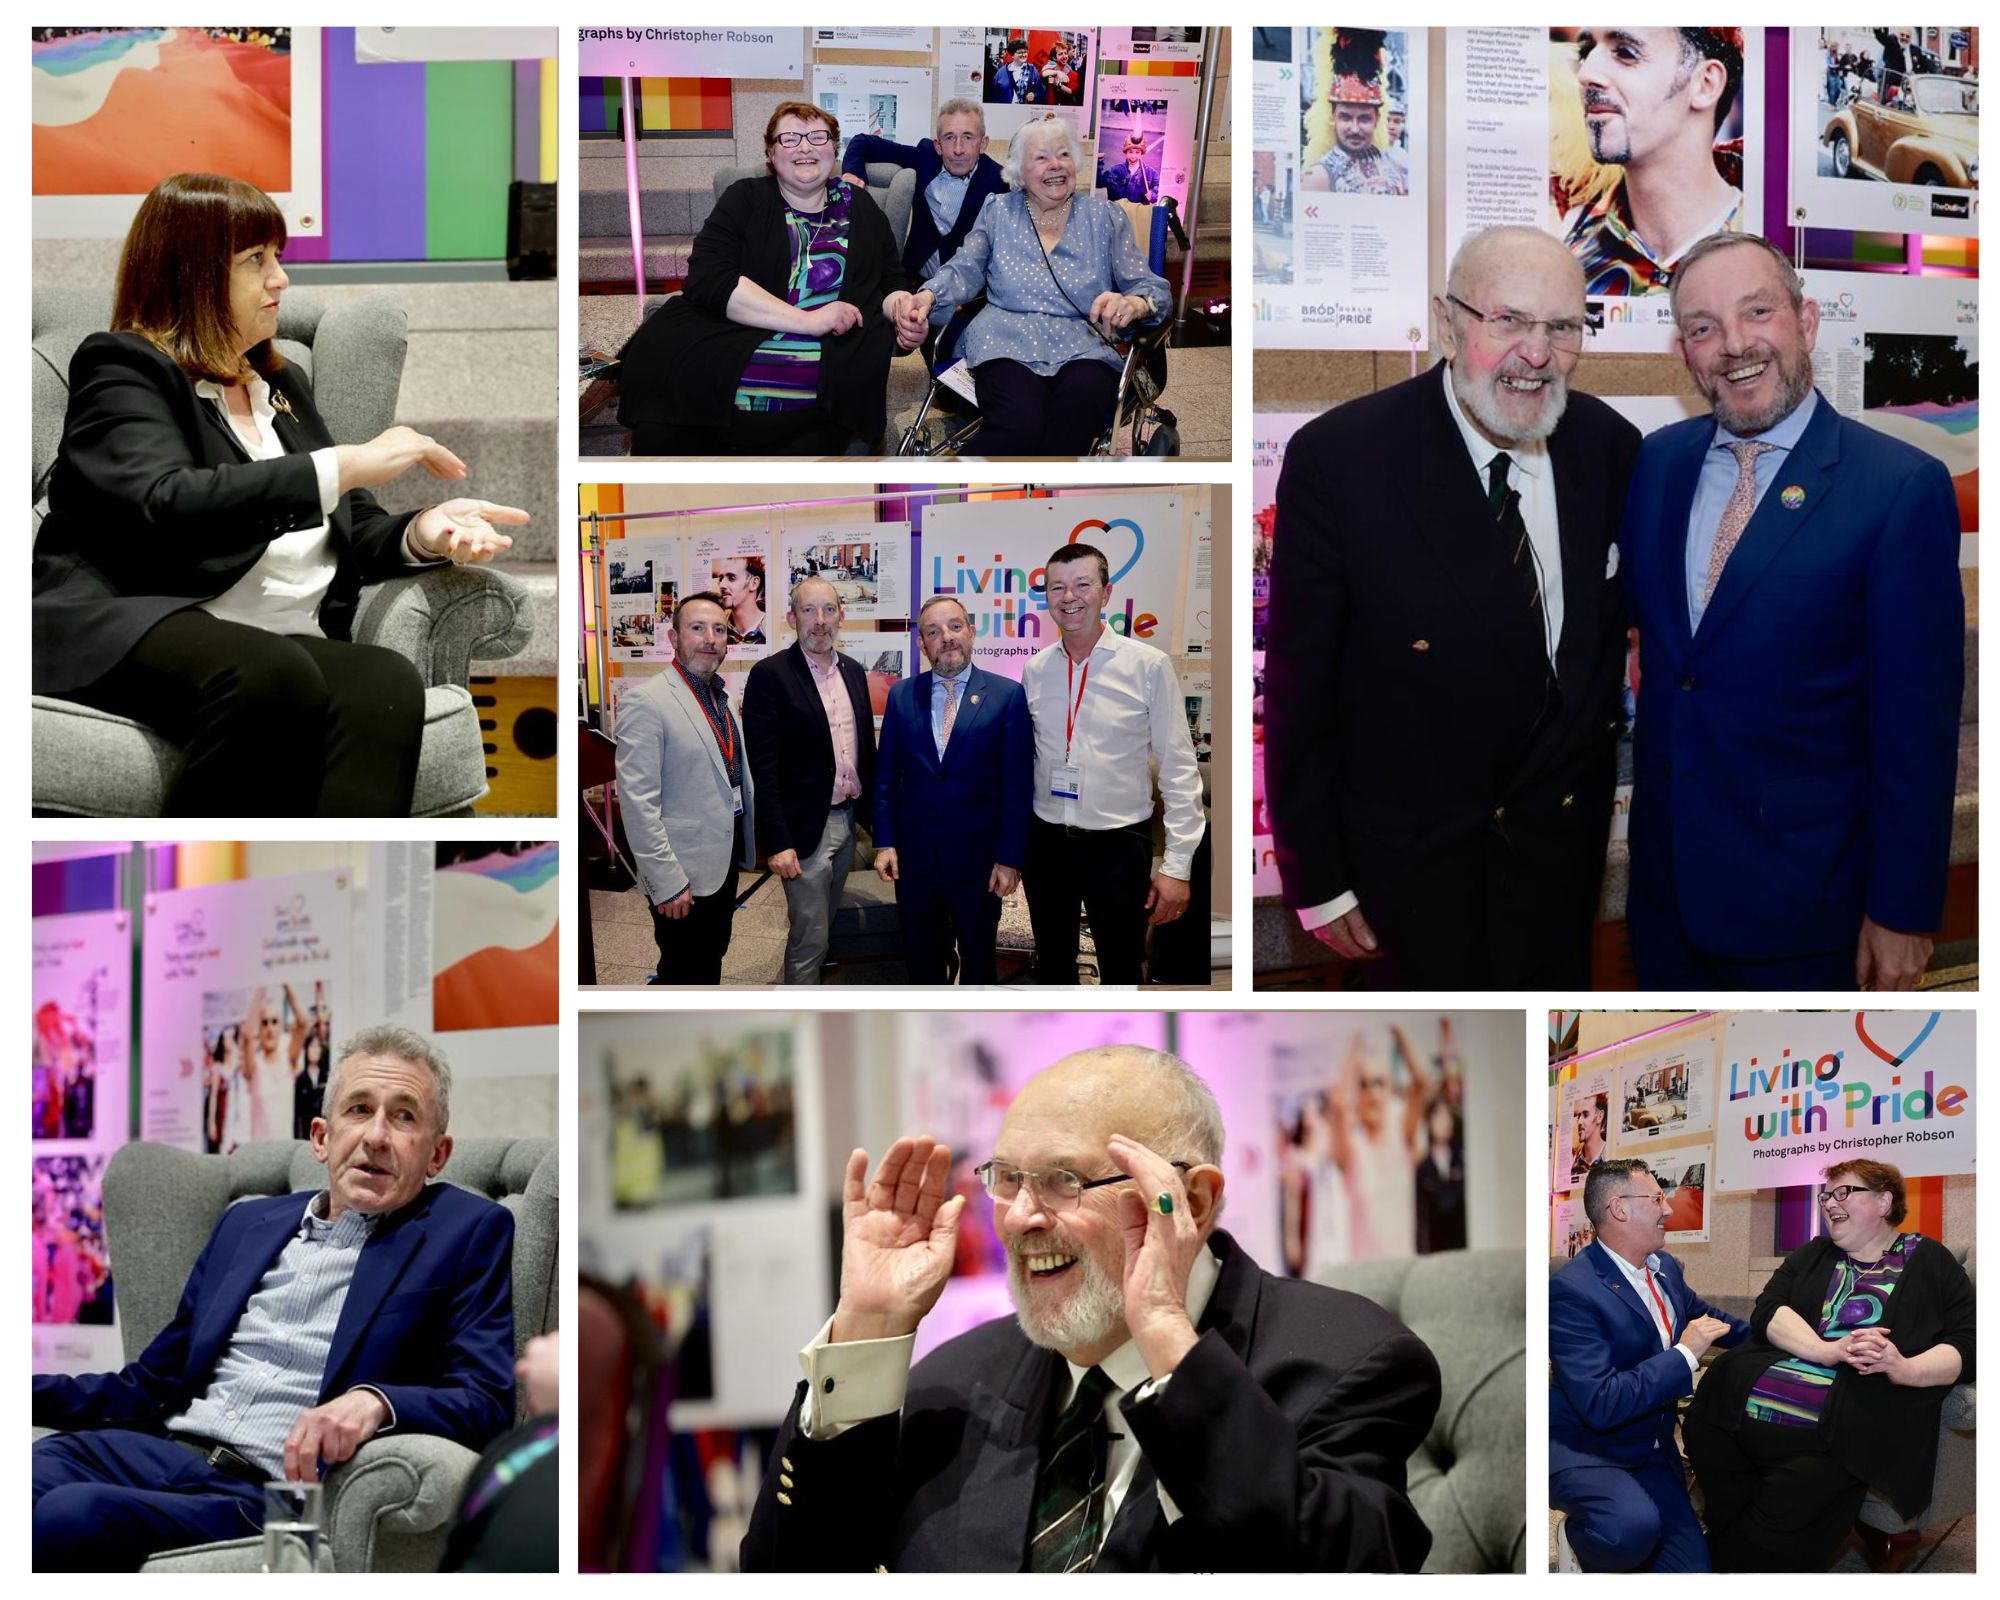 A collage of photos of guests and speakers at Bród 93/23